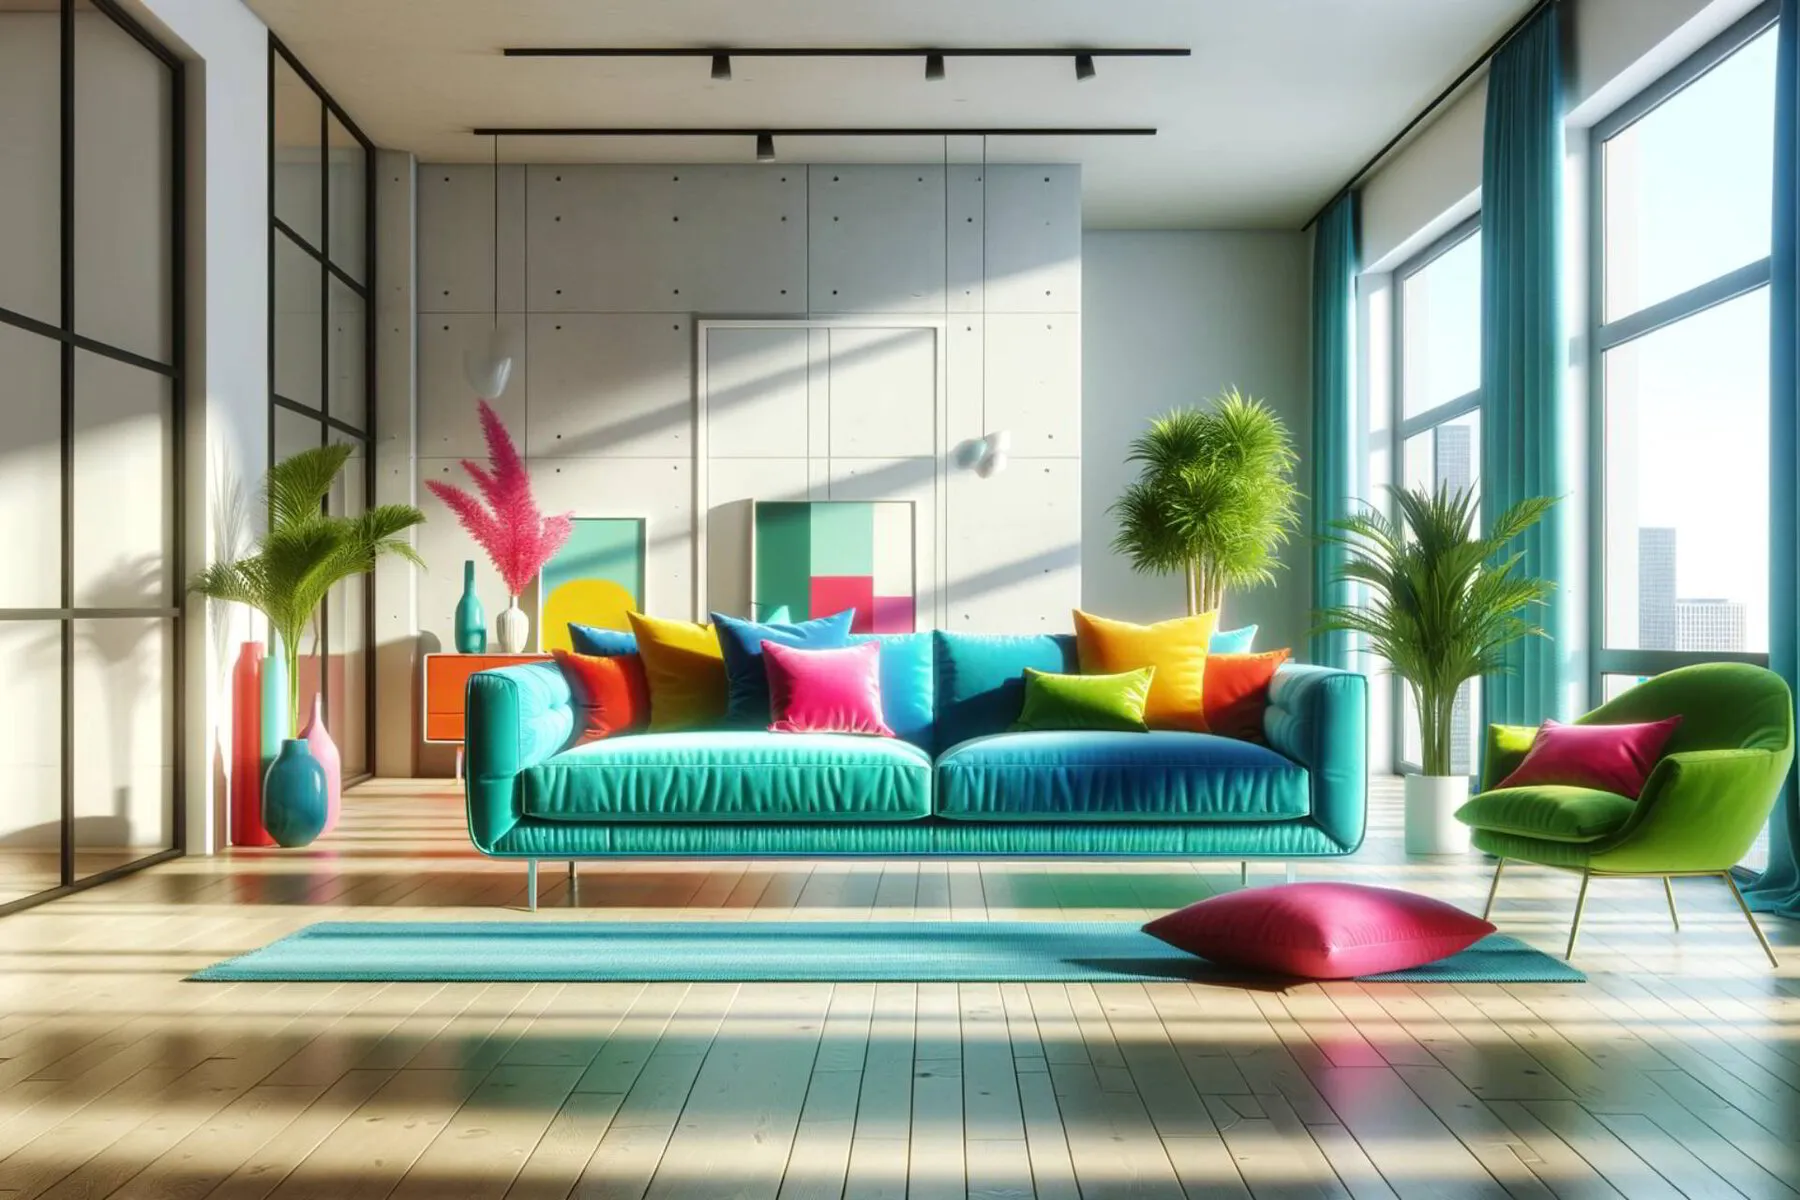 well-lit living room, with a focus on a vibrant and brightly colored couch as the centerpiece